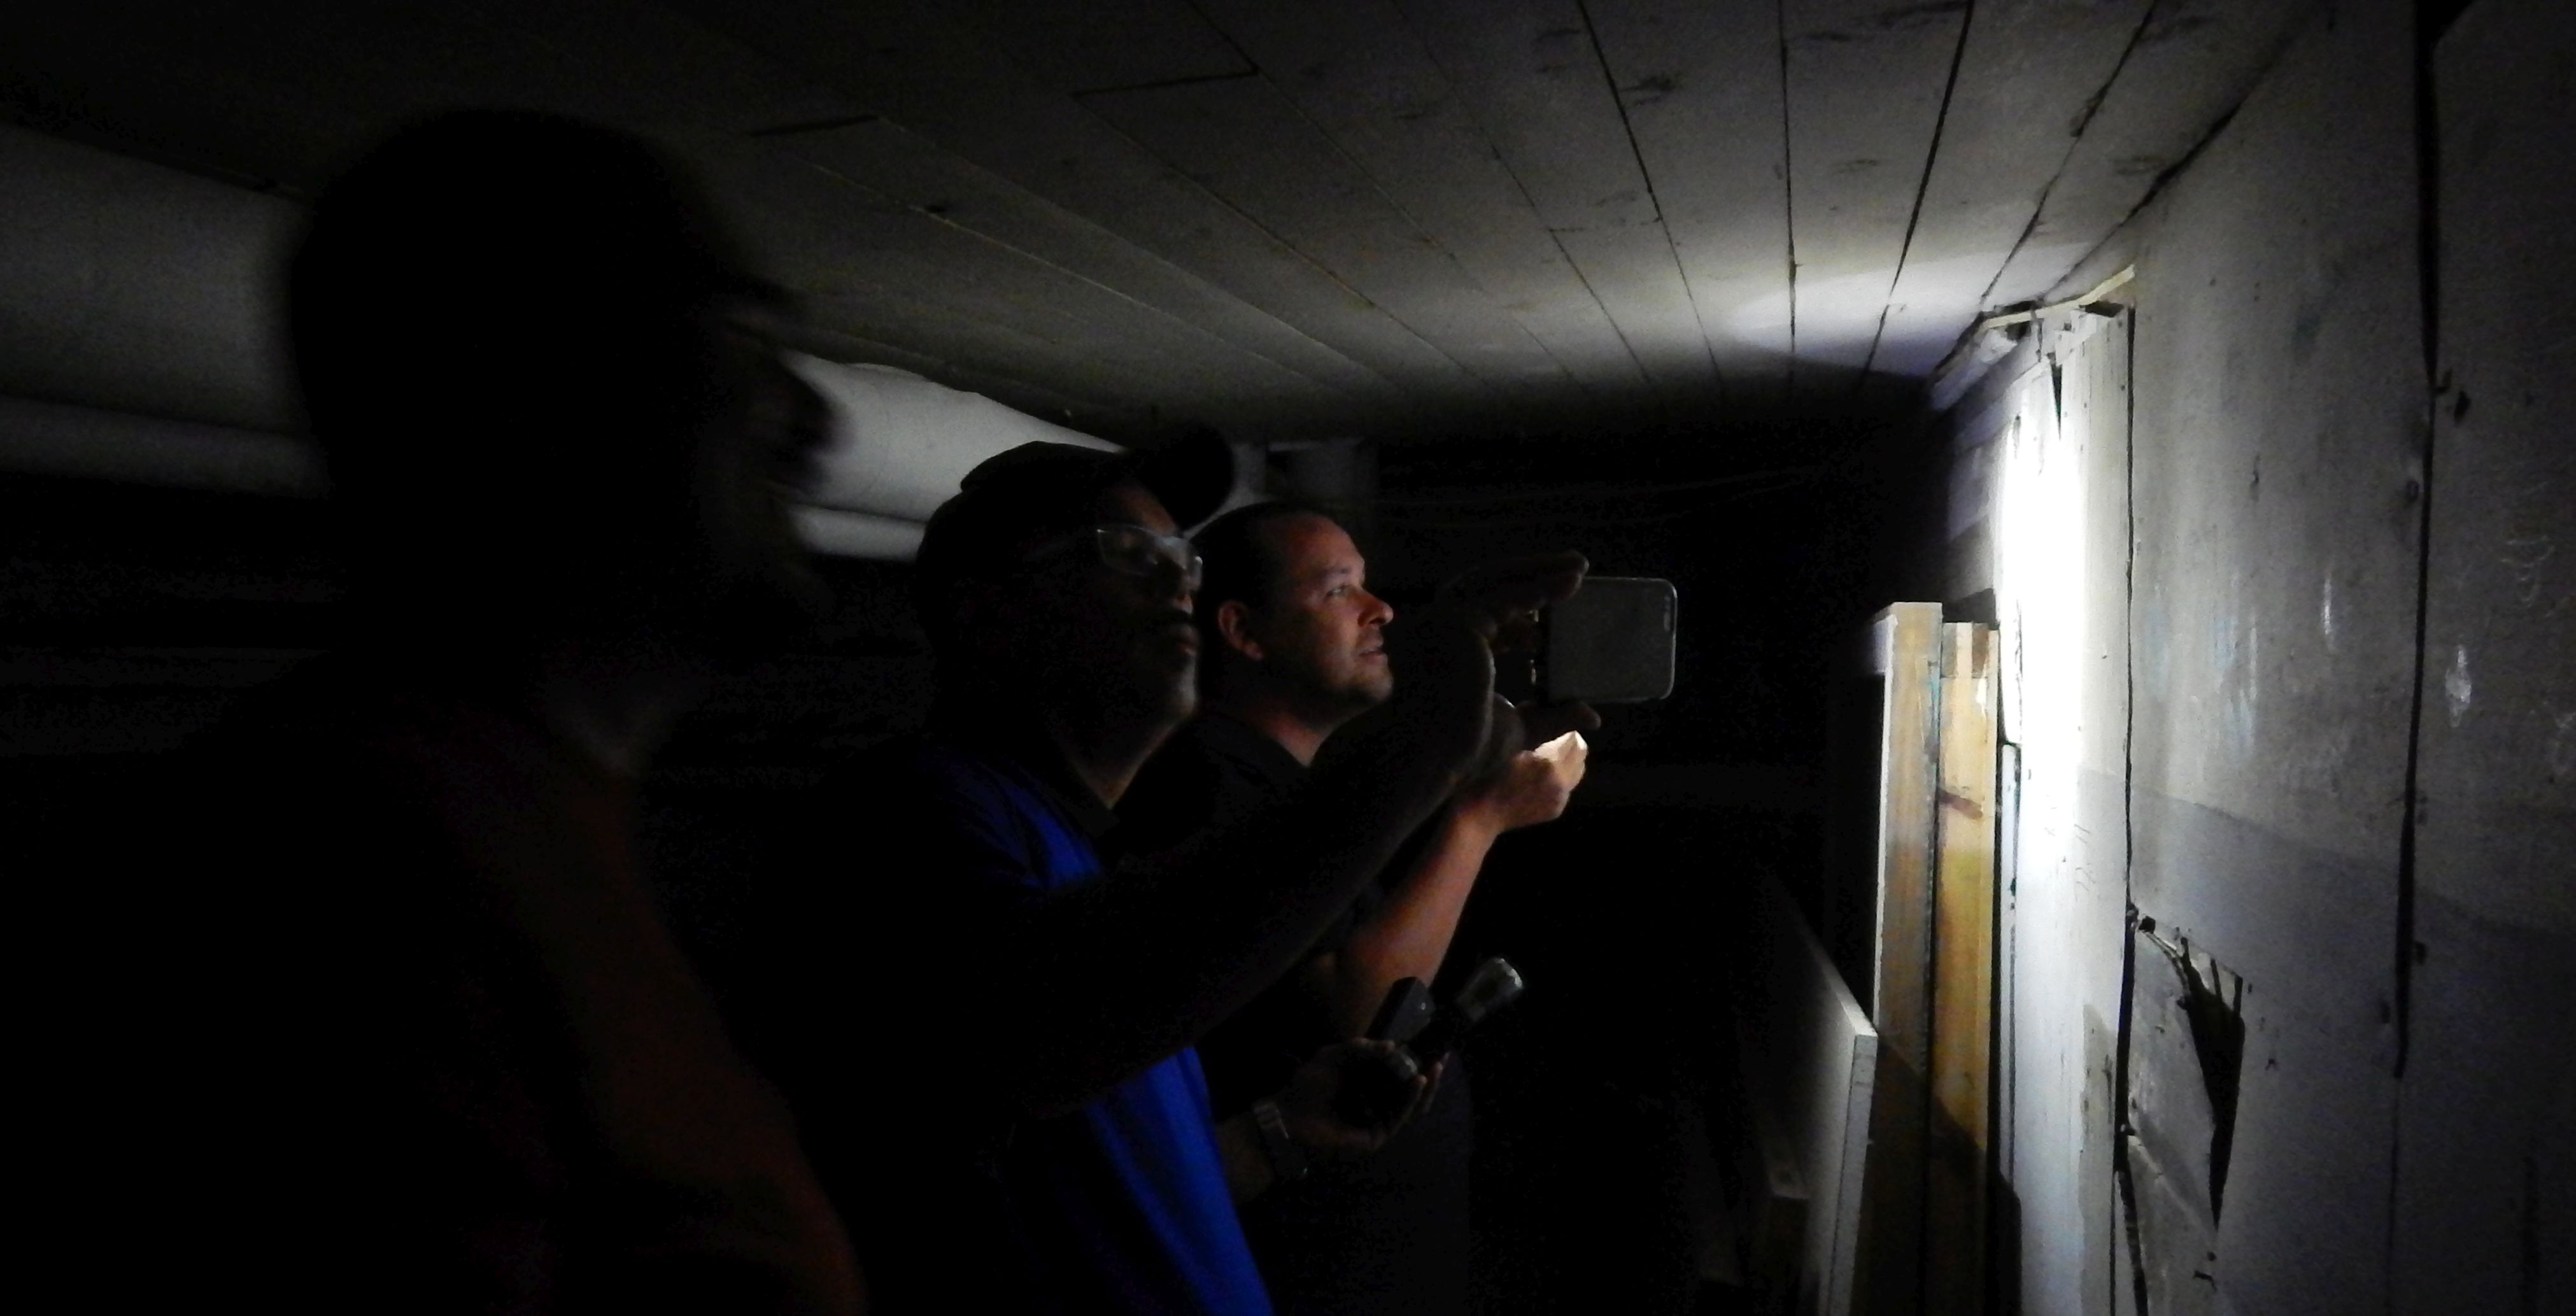 Aaron Gulyas, Greg Bishop and Tim Binnall investigating the basement of the Astor Theatre on Saturday night.